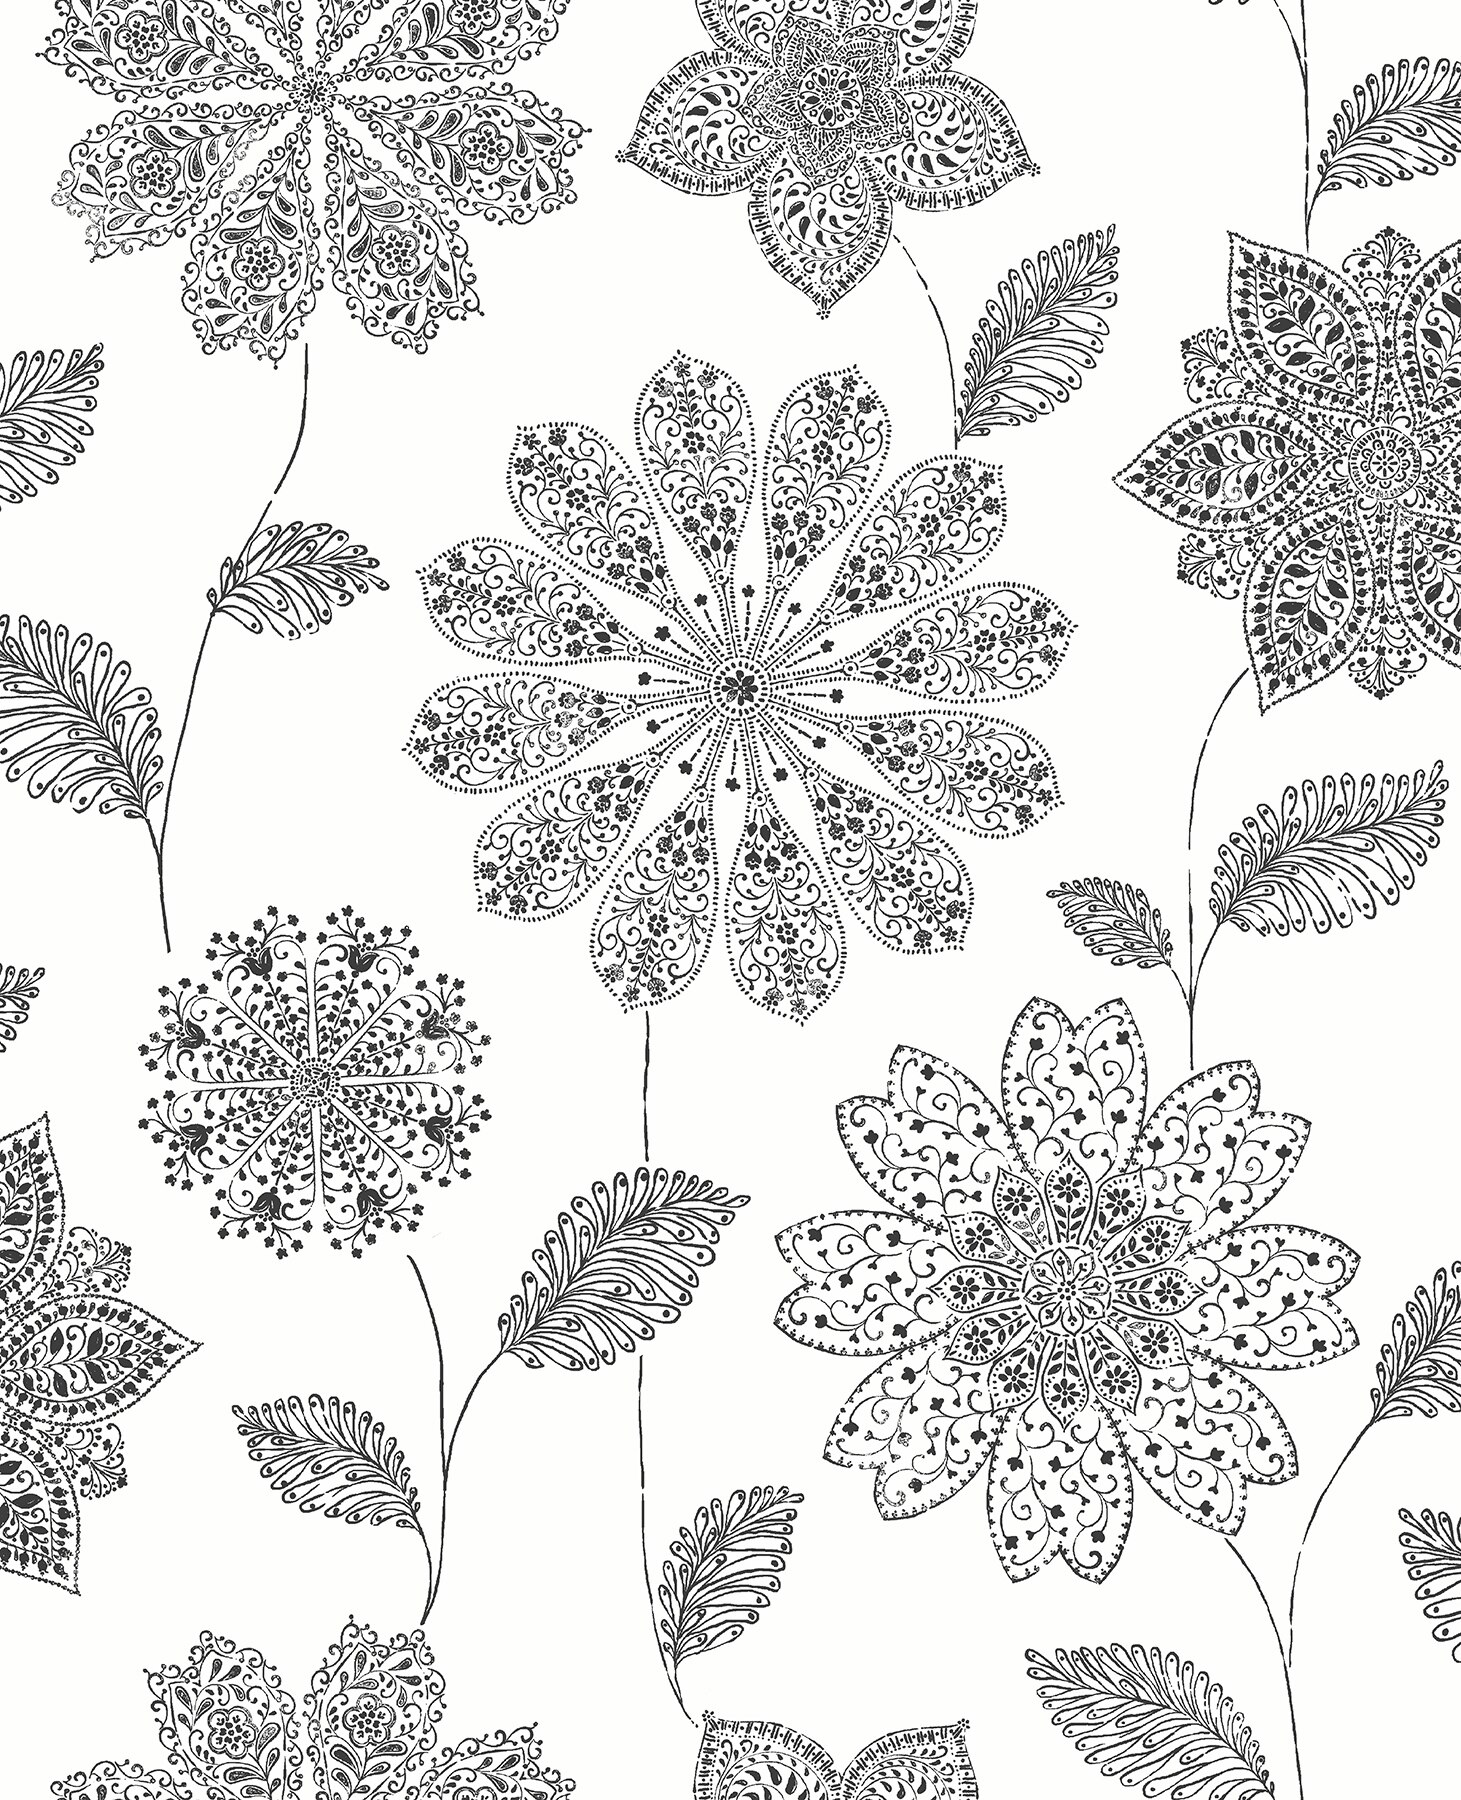 Intricate Designs Black And White - HD Wallpaper 